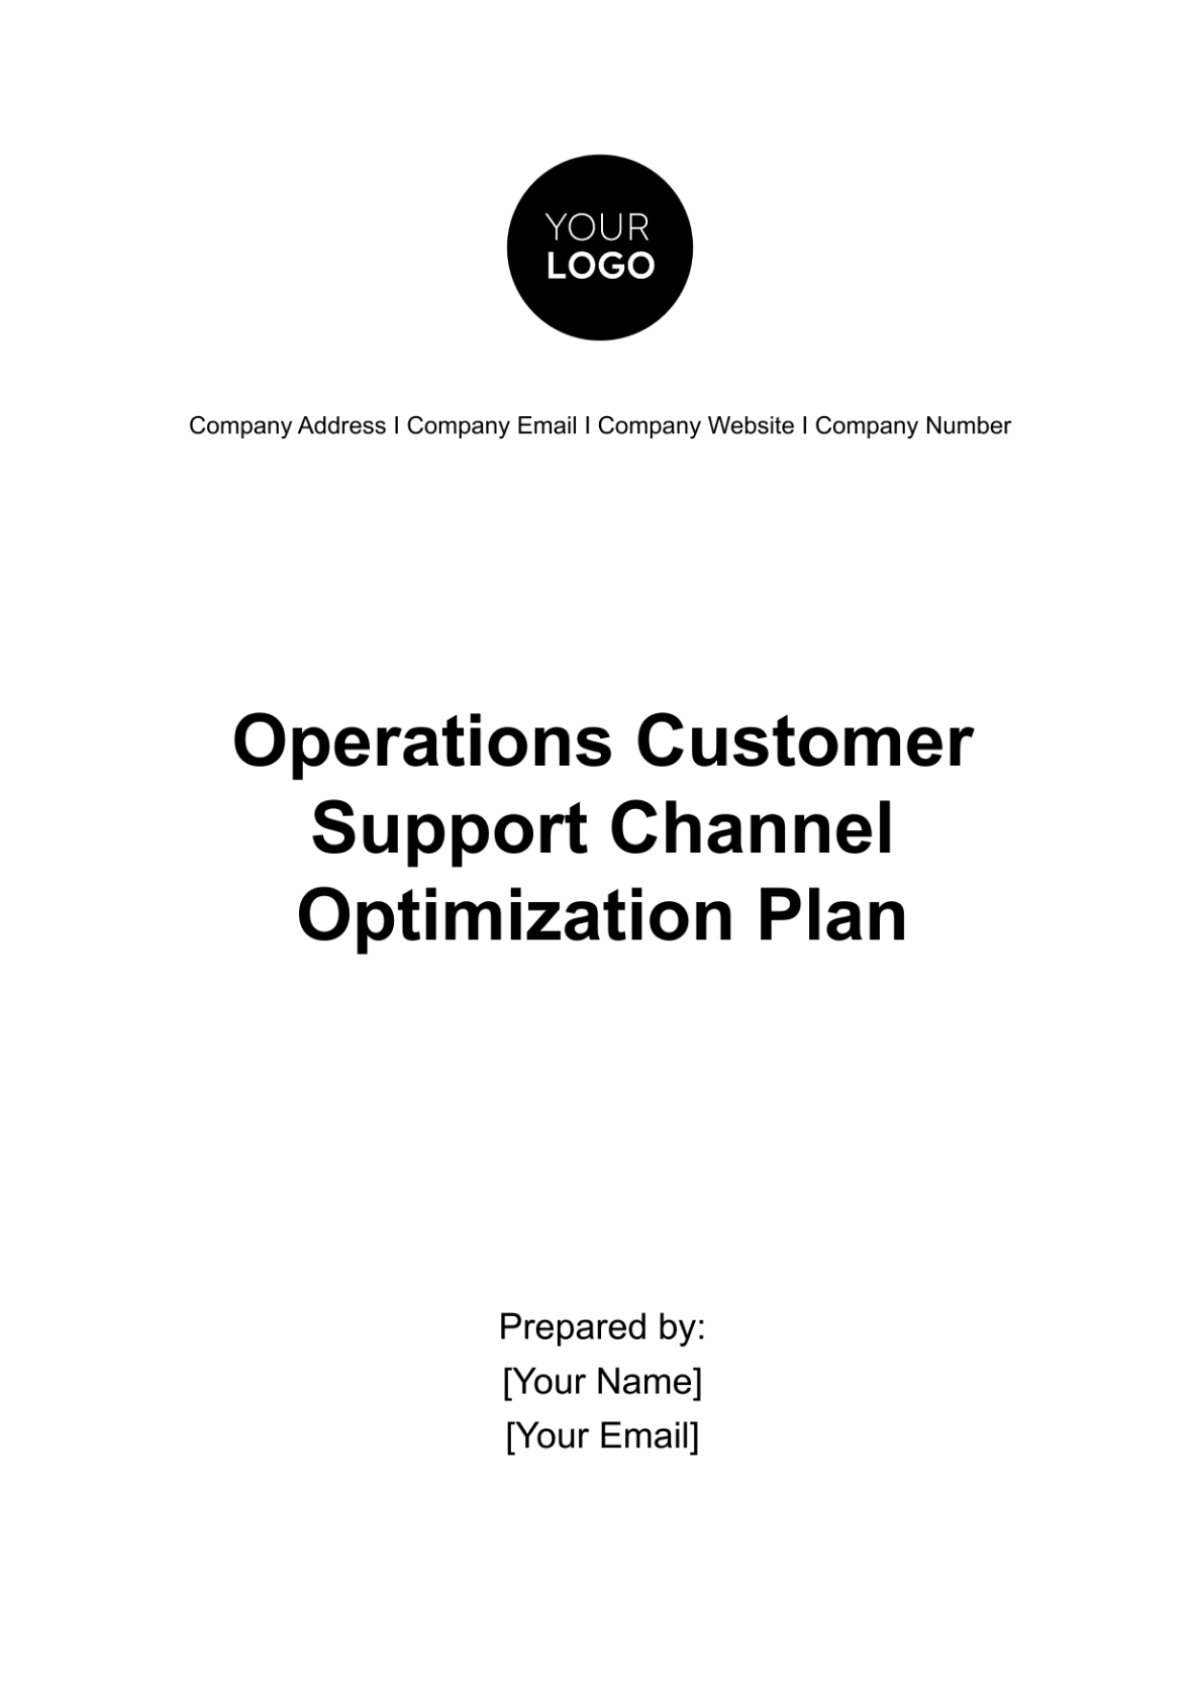 Operations Customer Support Channel Optimization Plan Template